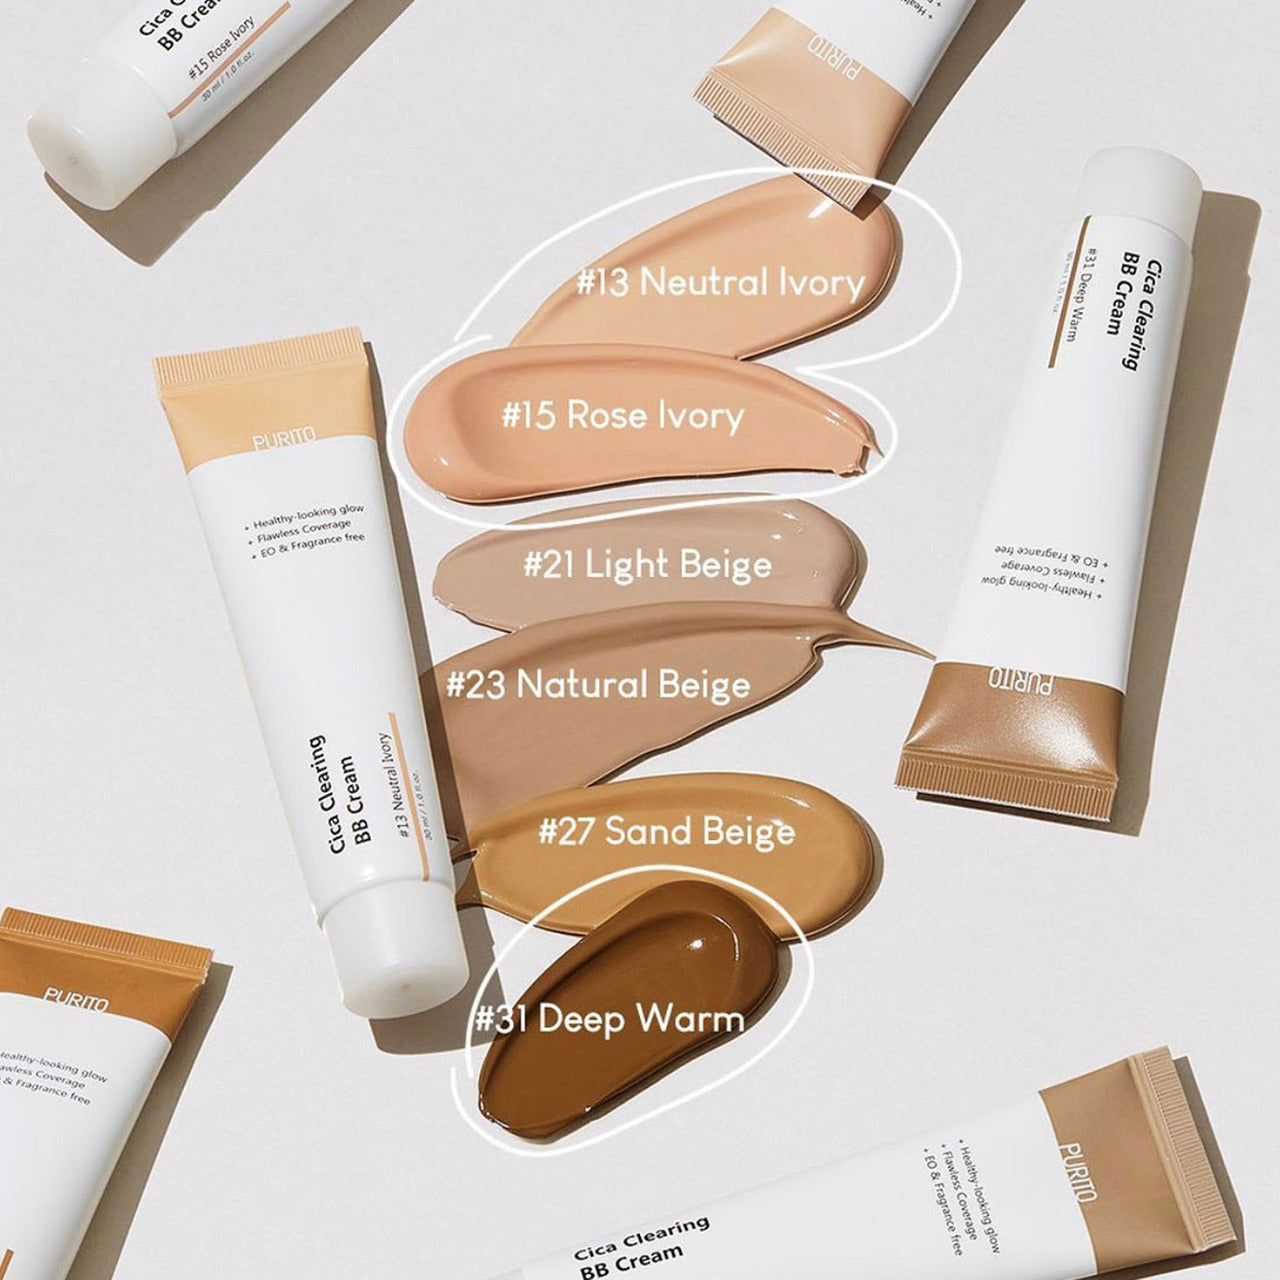 PURITO Cica Clearing BB Cream SPF38 - 6 Shades (30ml) shades swatch